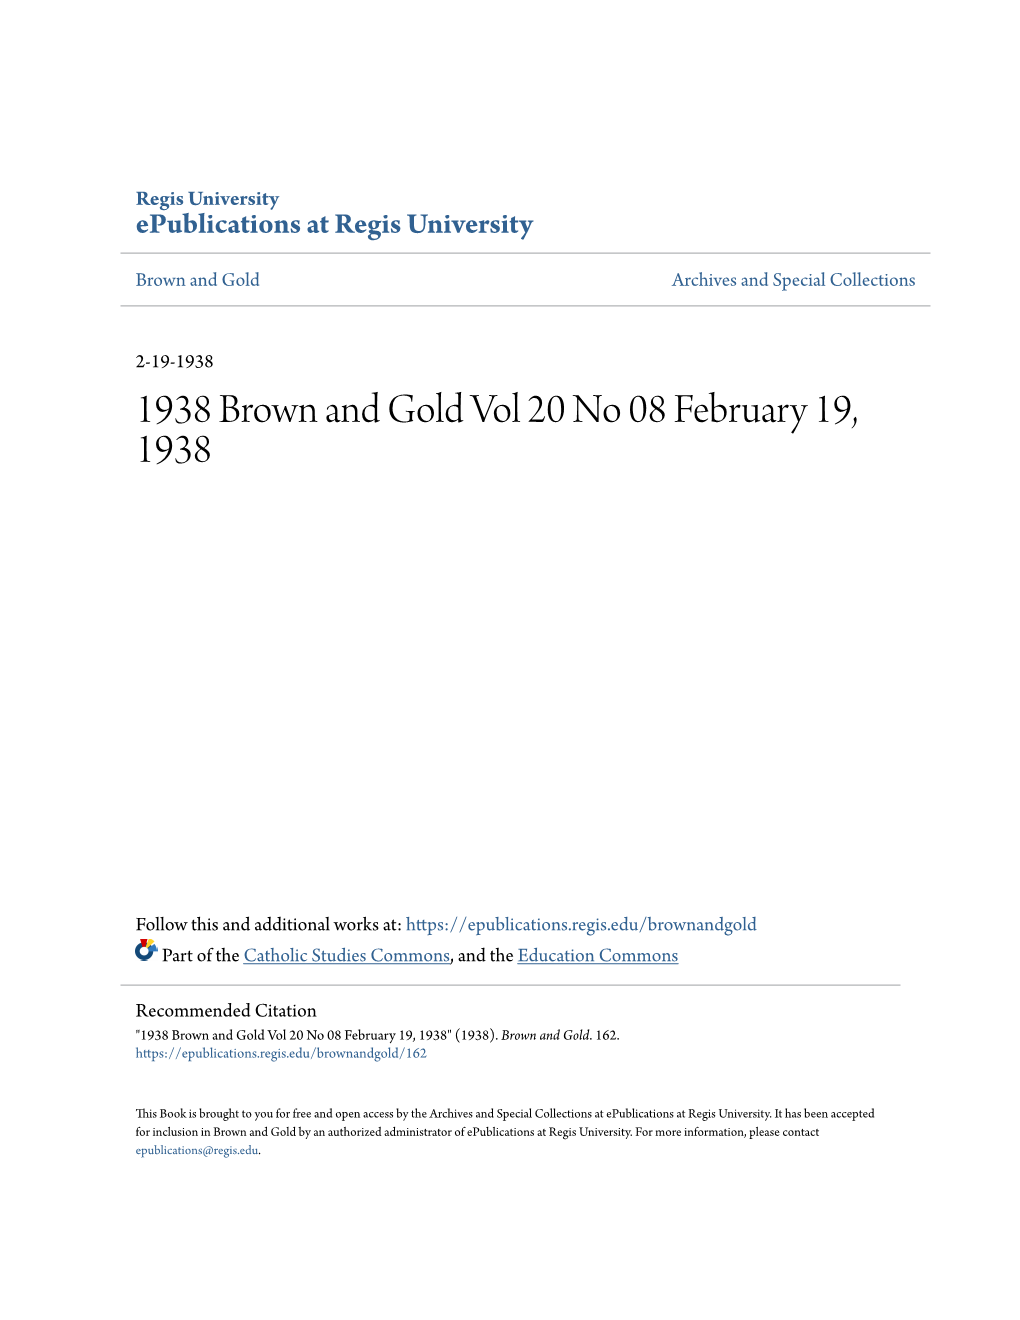 1938 Brown and Gold Vol 20 No 08 February 19, 1938